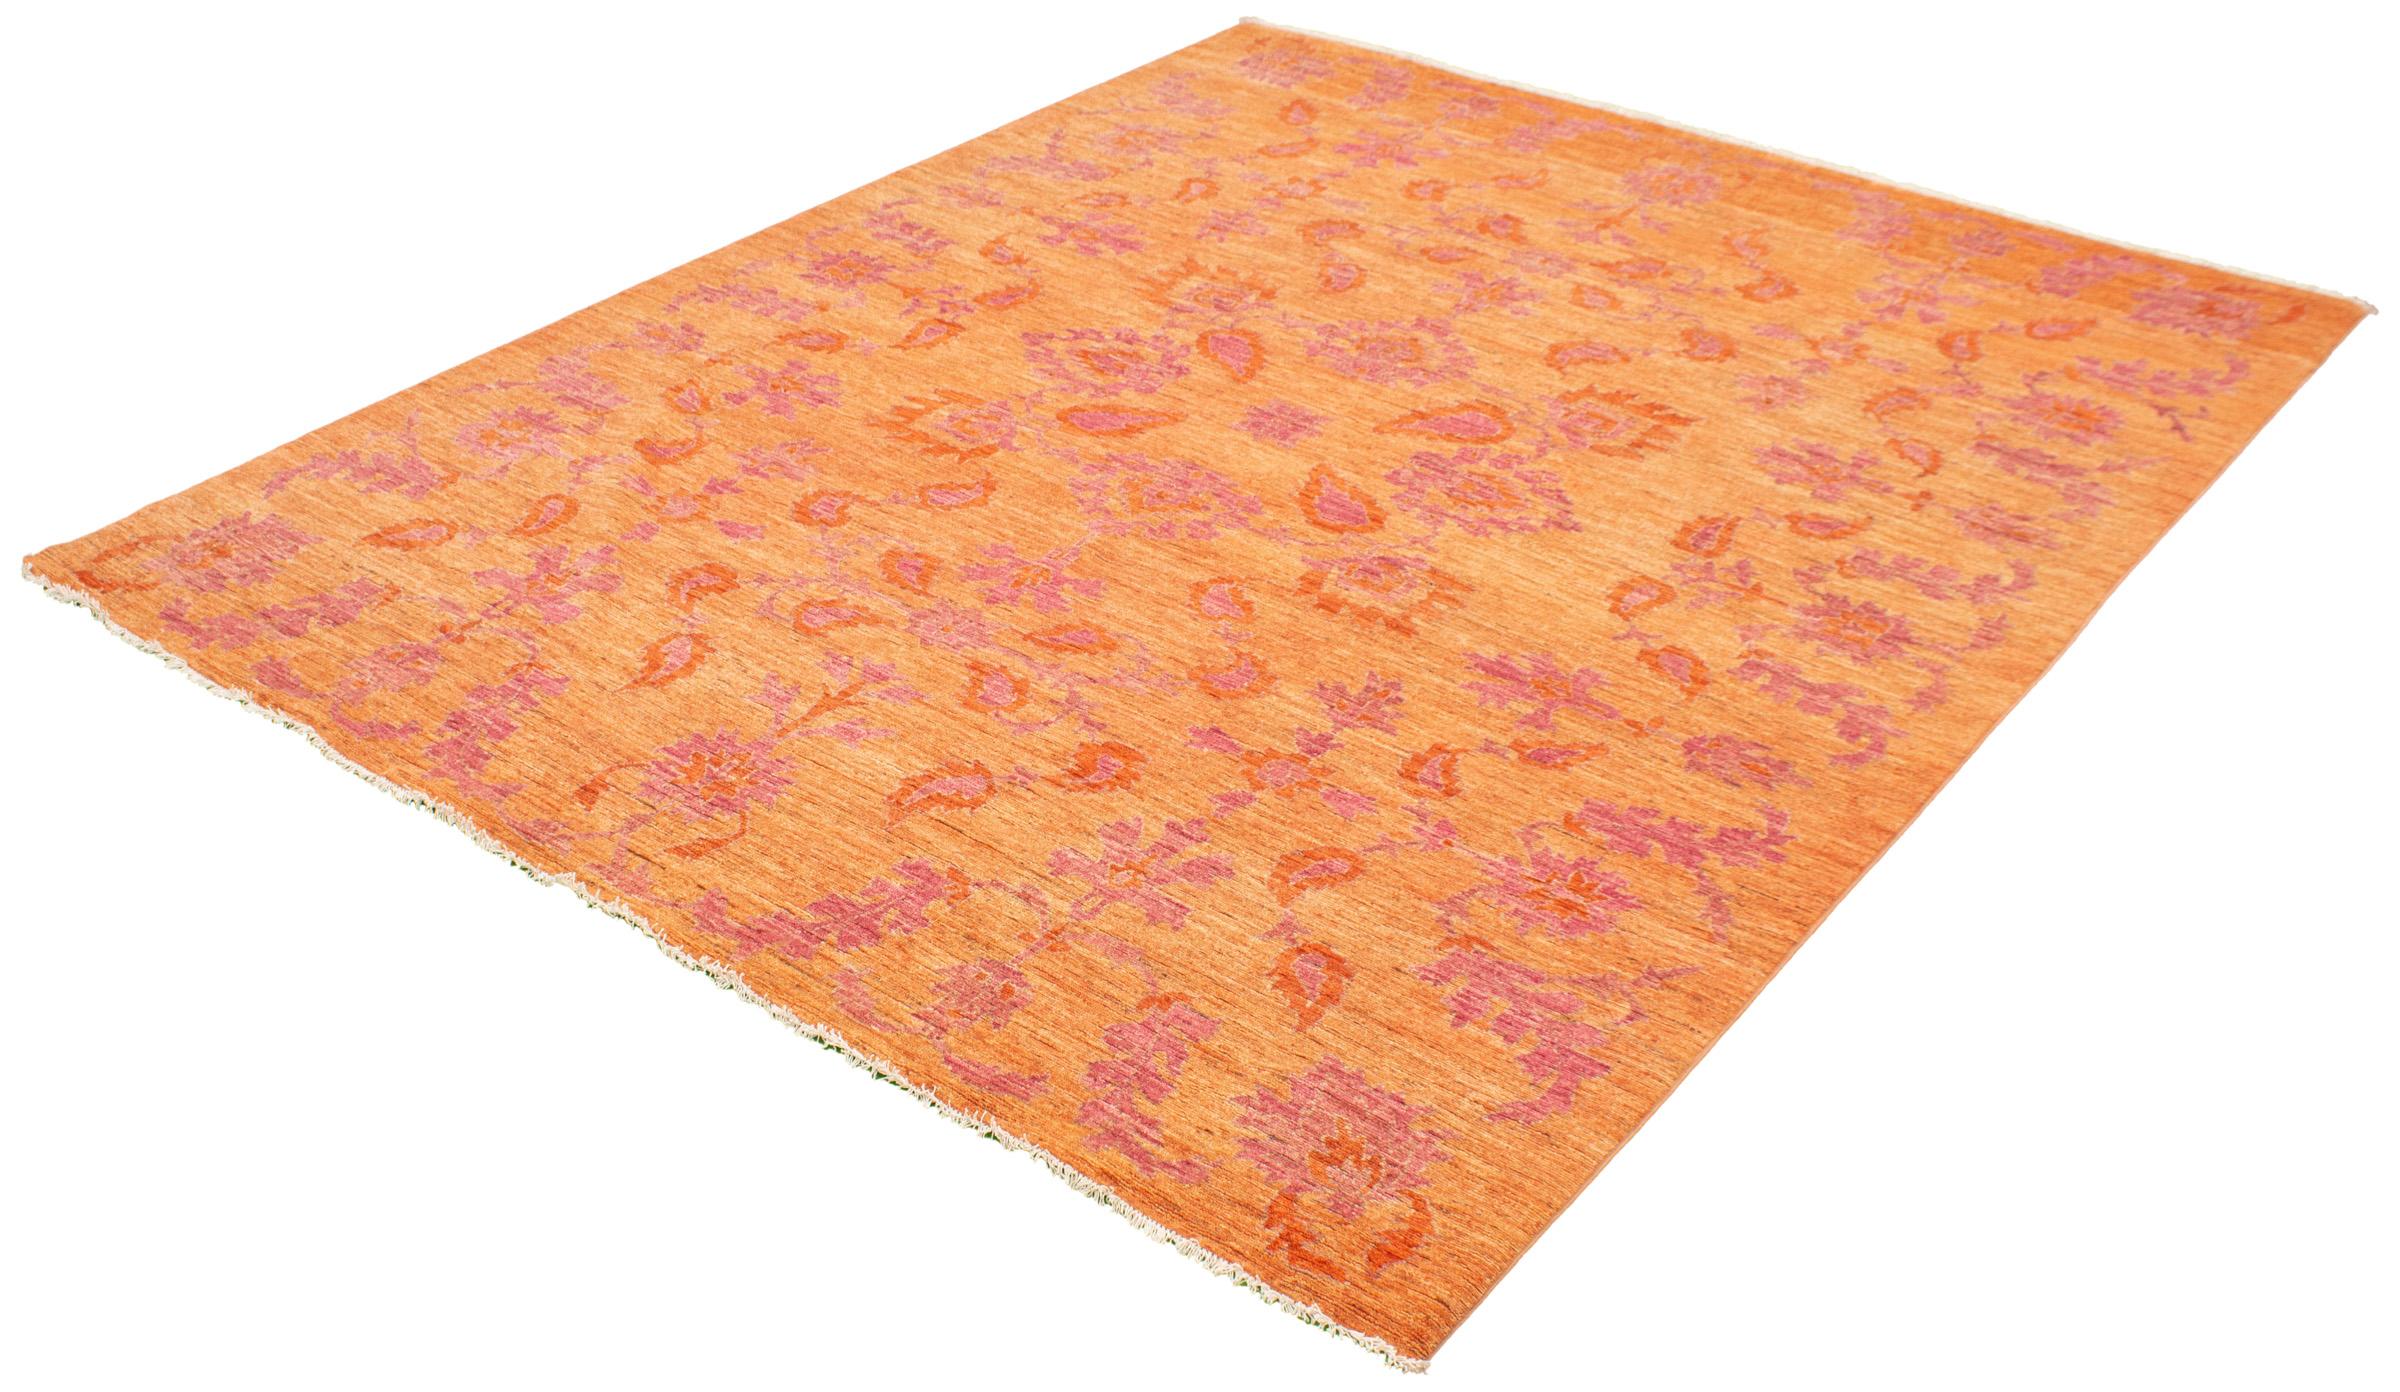 Hand-Knotted Fine Persian Oushak Rug, Pink and Orange, Transitional Floral Design, 9' x 12' For Sale